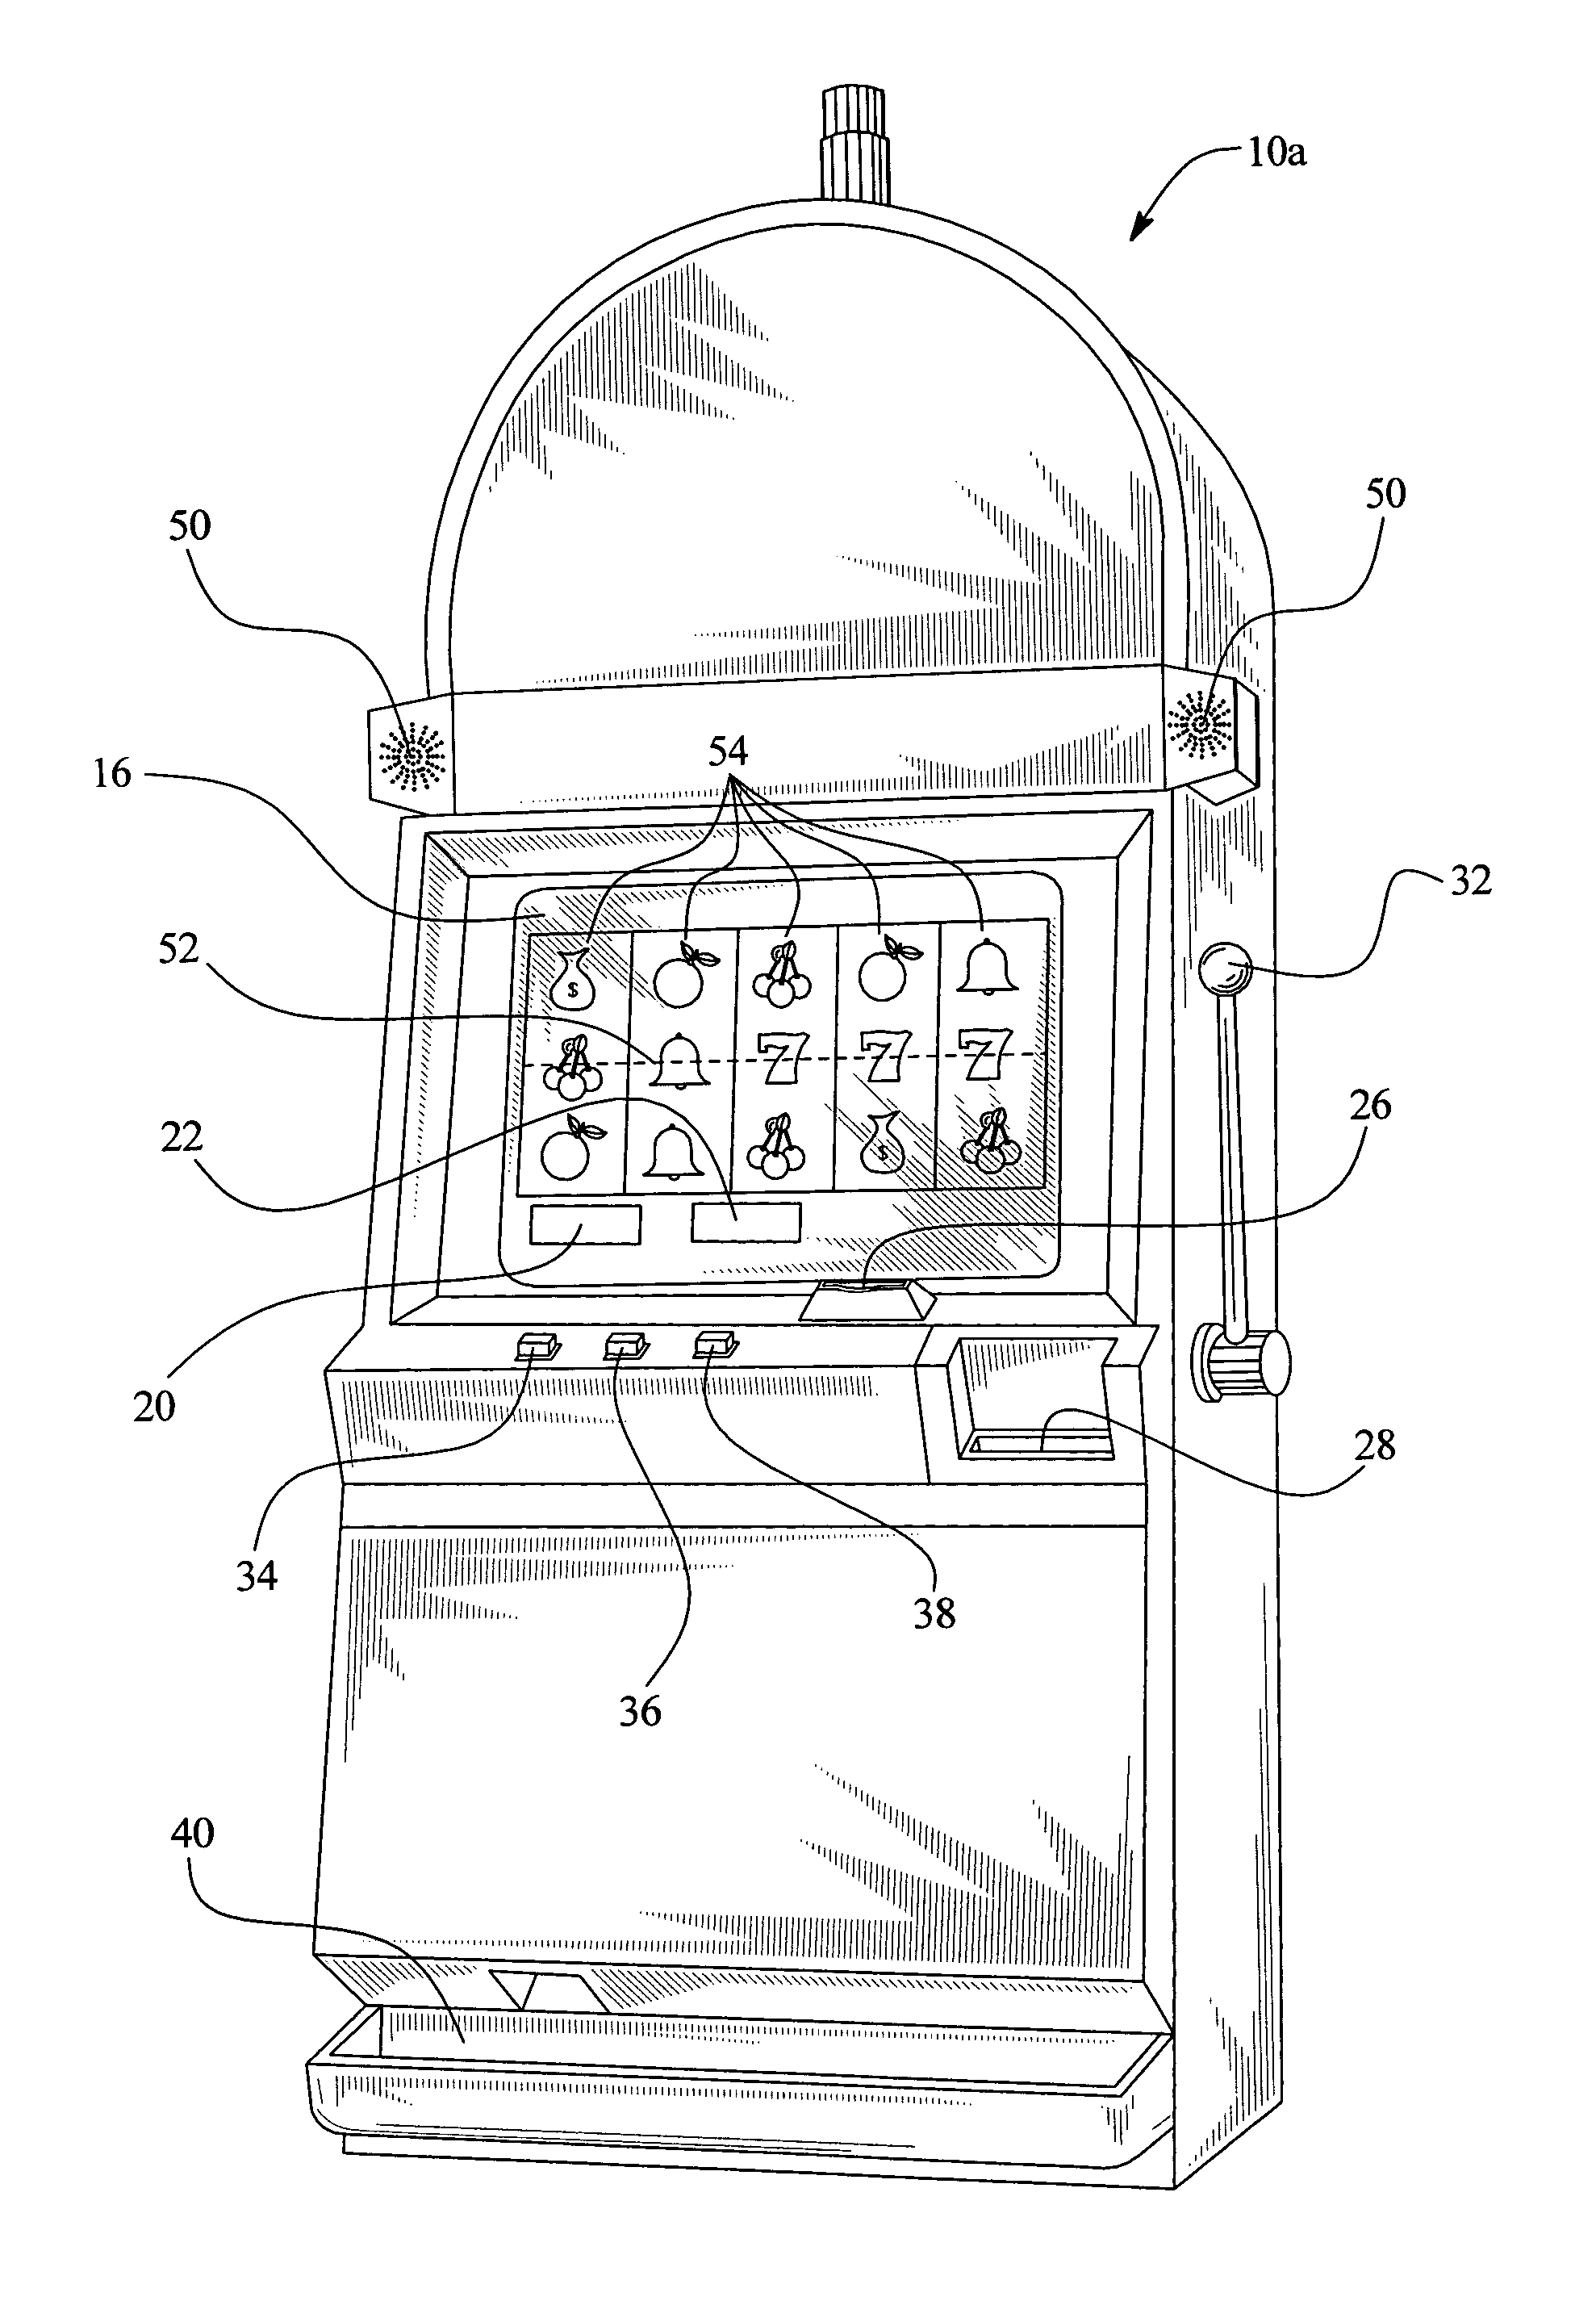 Gaming device having a system for dynamically aligning background music with play session events